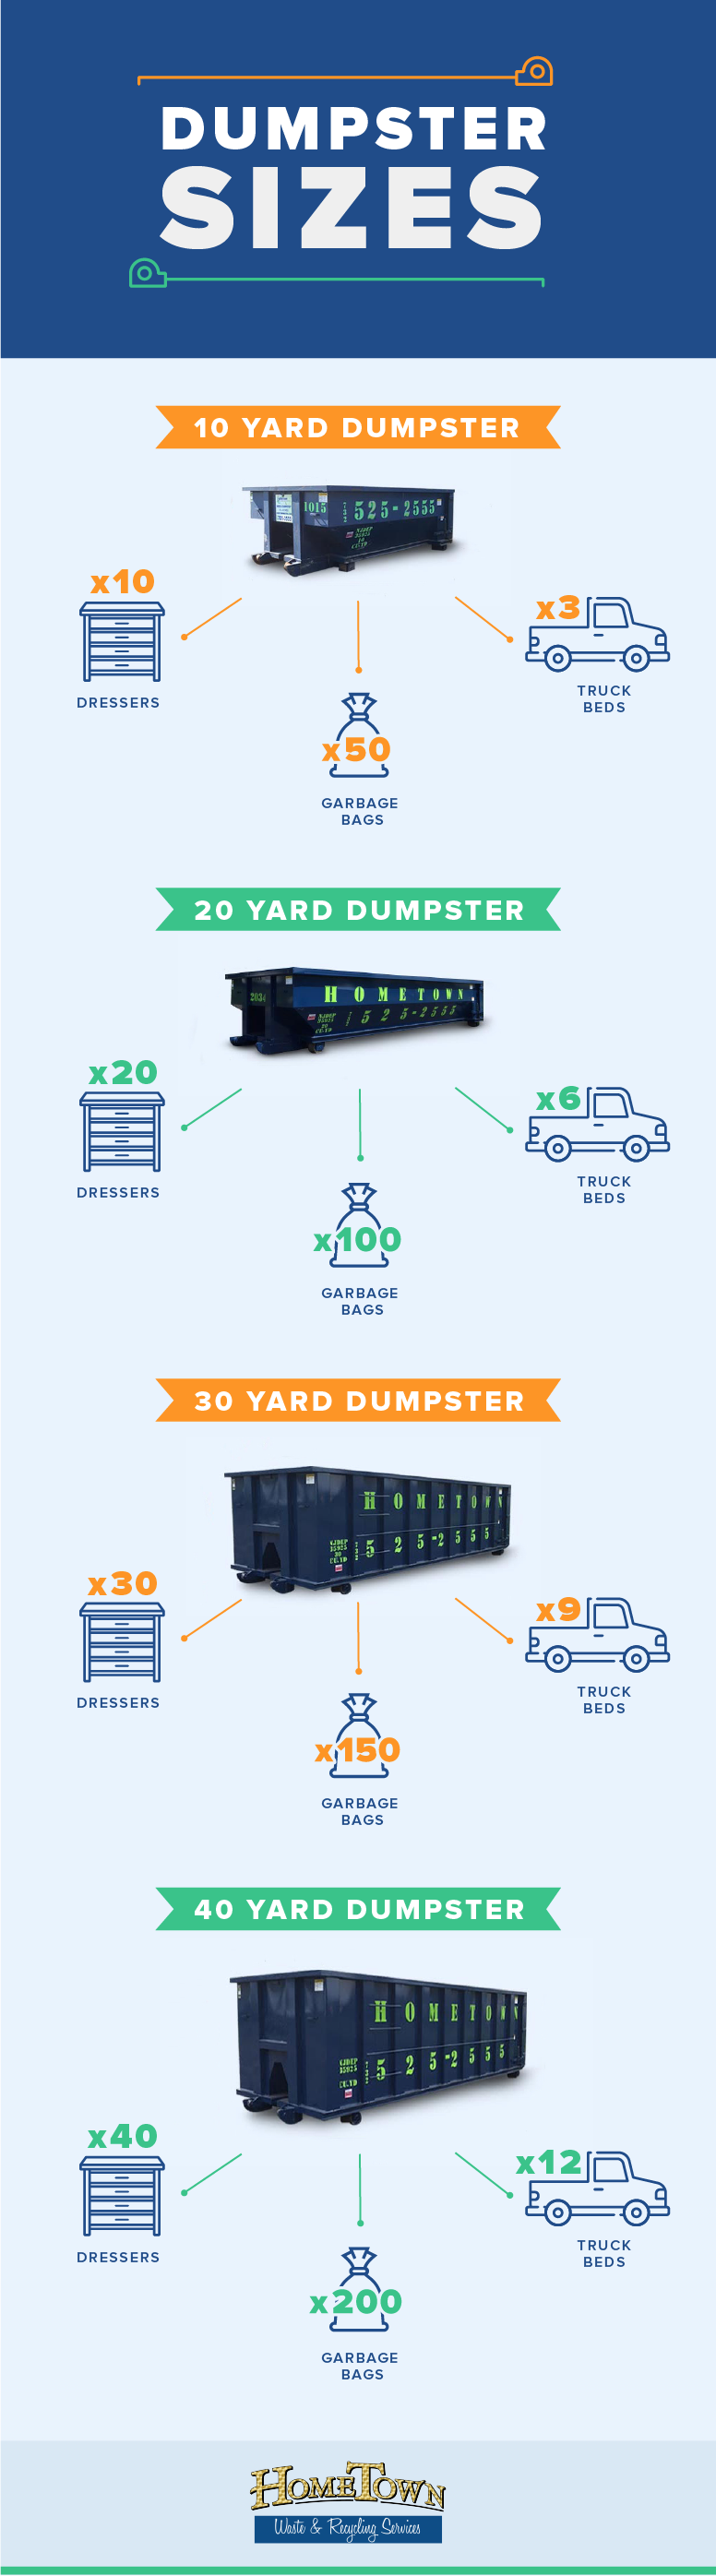 infographic of what a 10, 20, 30, and 40 yard dumpster is equivalent to